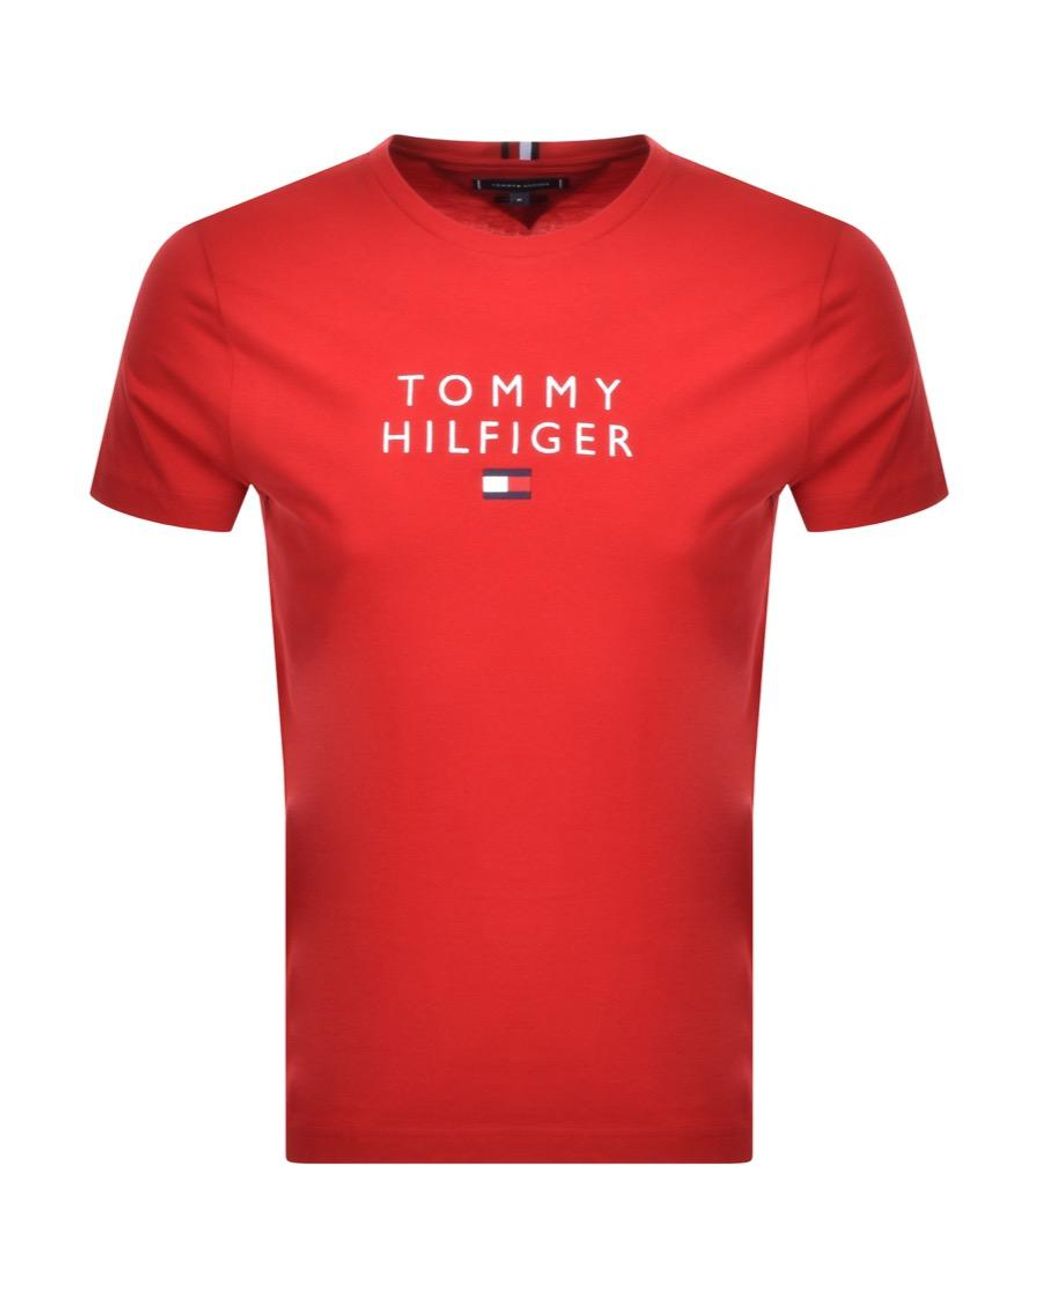 Tommy Hilfiger Cotton Icon Flag Logo T Shirt in Red for Men - Lyst